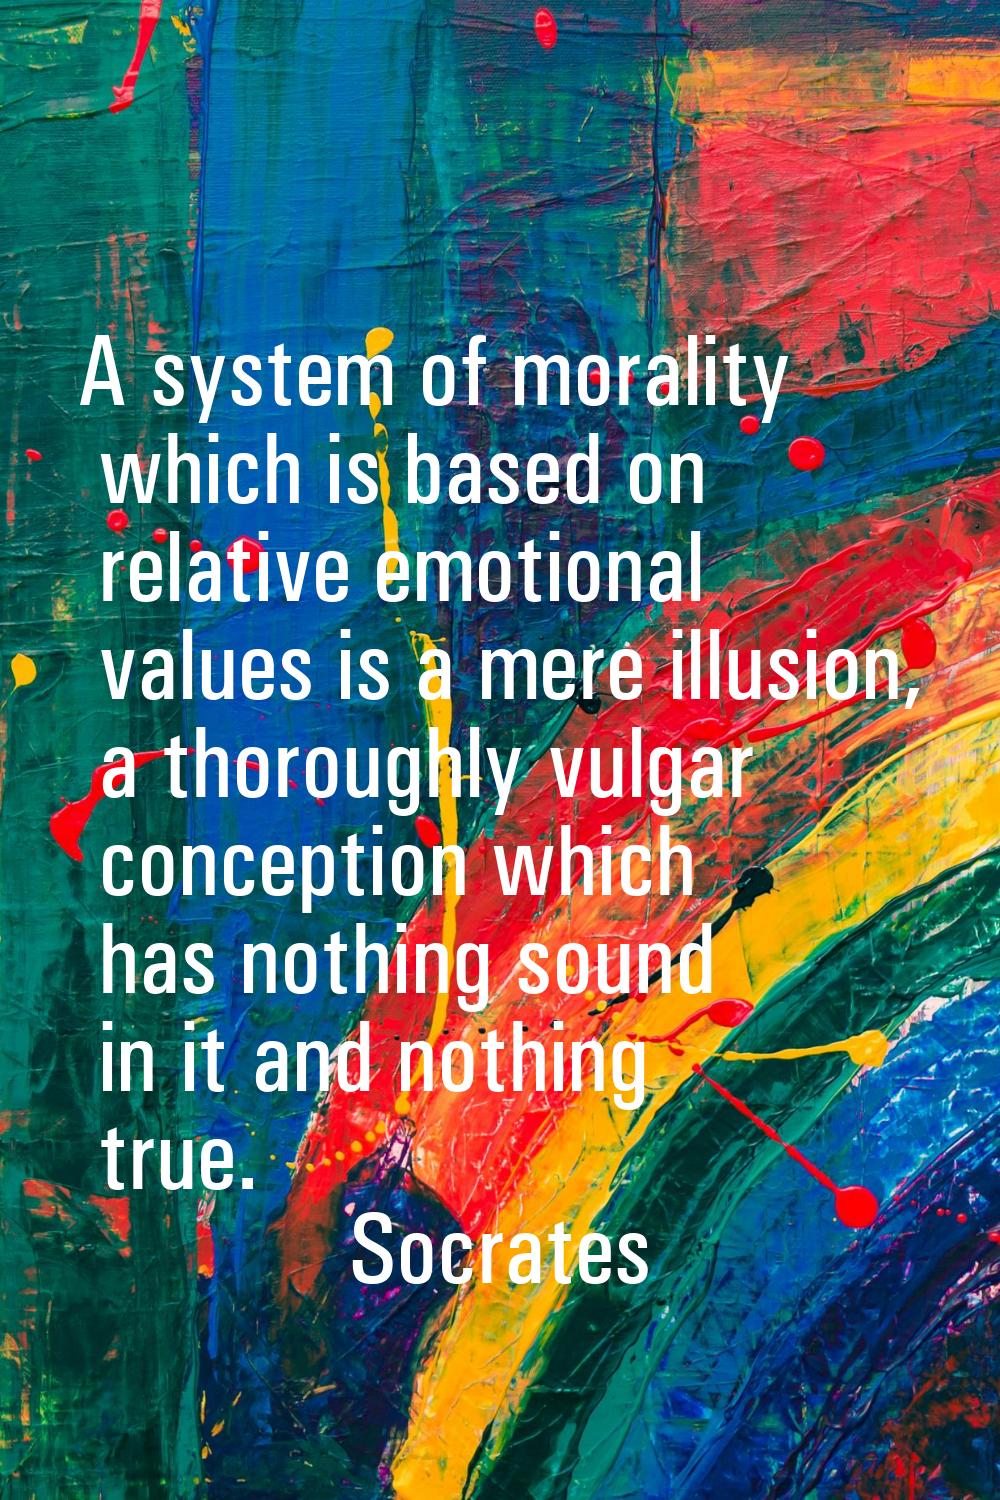 A system of morality which is based on relative emotional values is a mere illusion, a thoroughly v